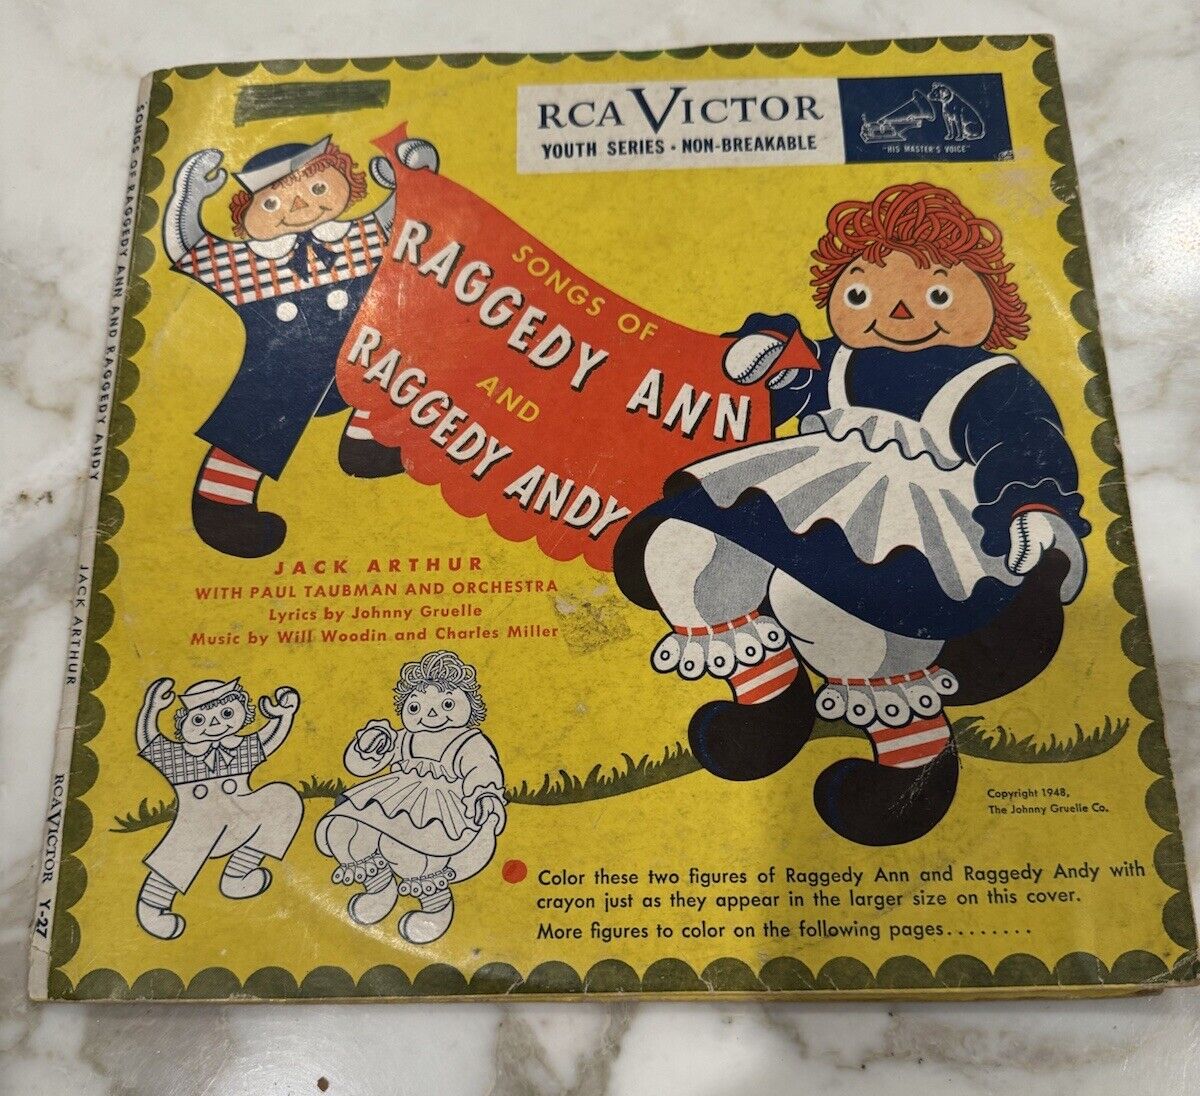 Vtg 1948 Songs Of Raggedy Ann & Andy RCA Victor 78 Rpm Record Y-27